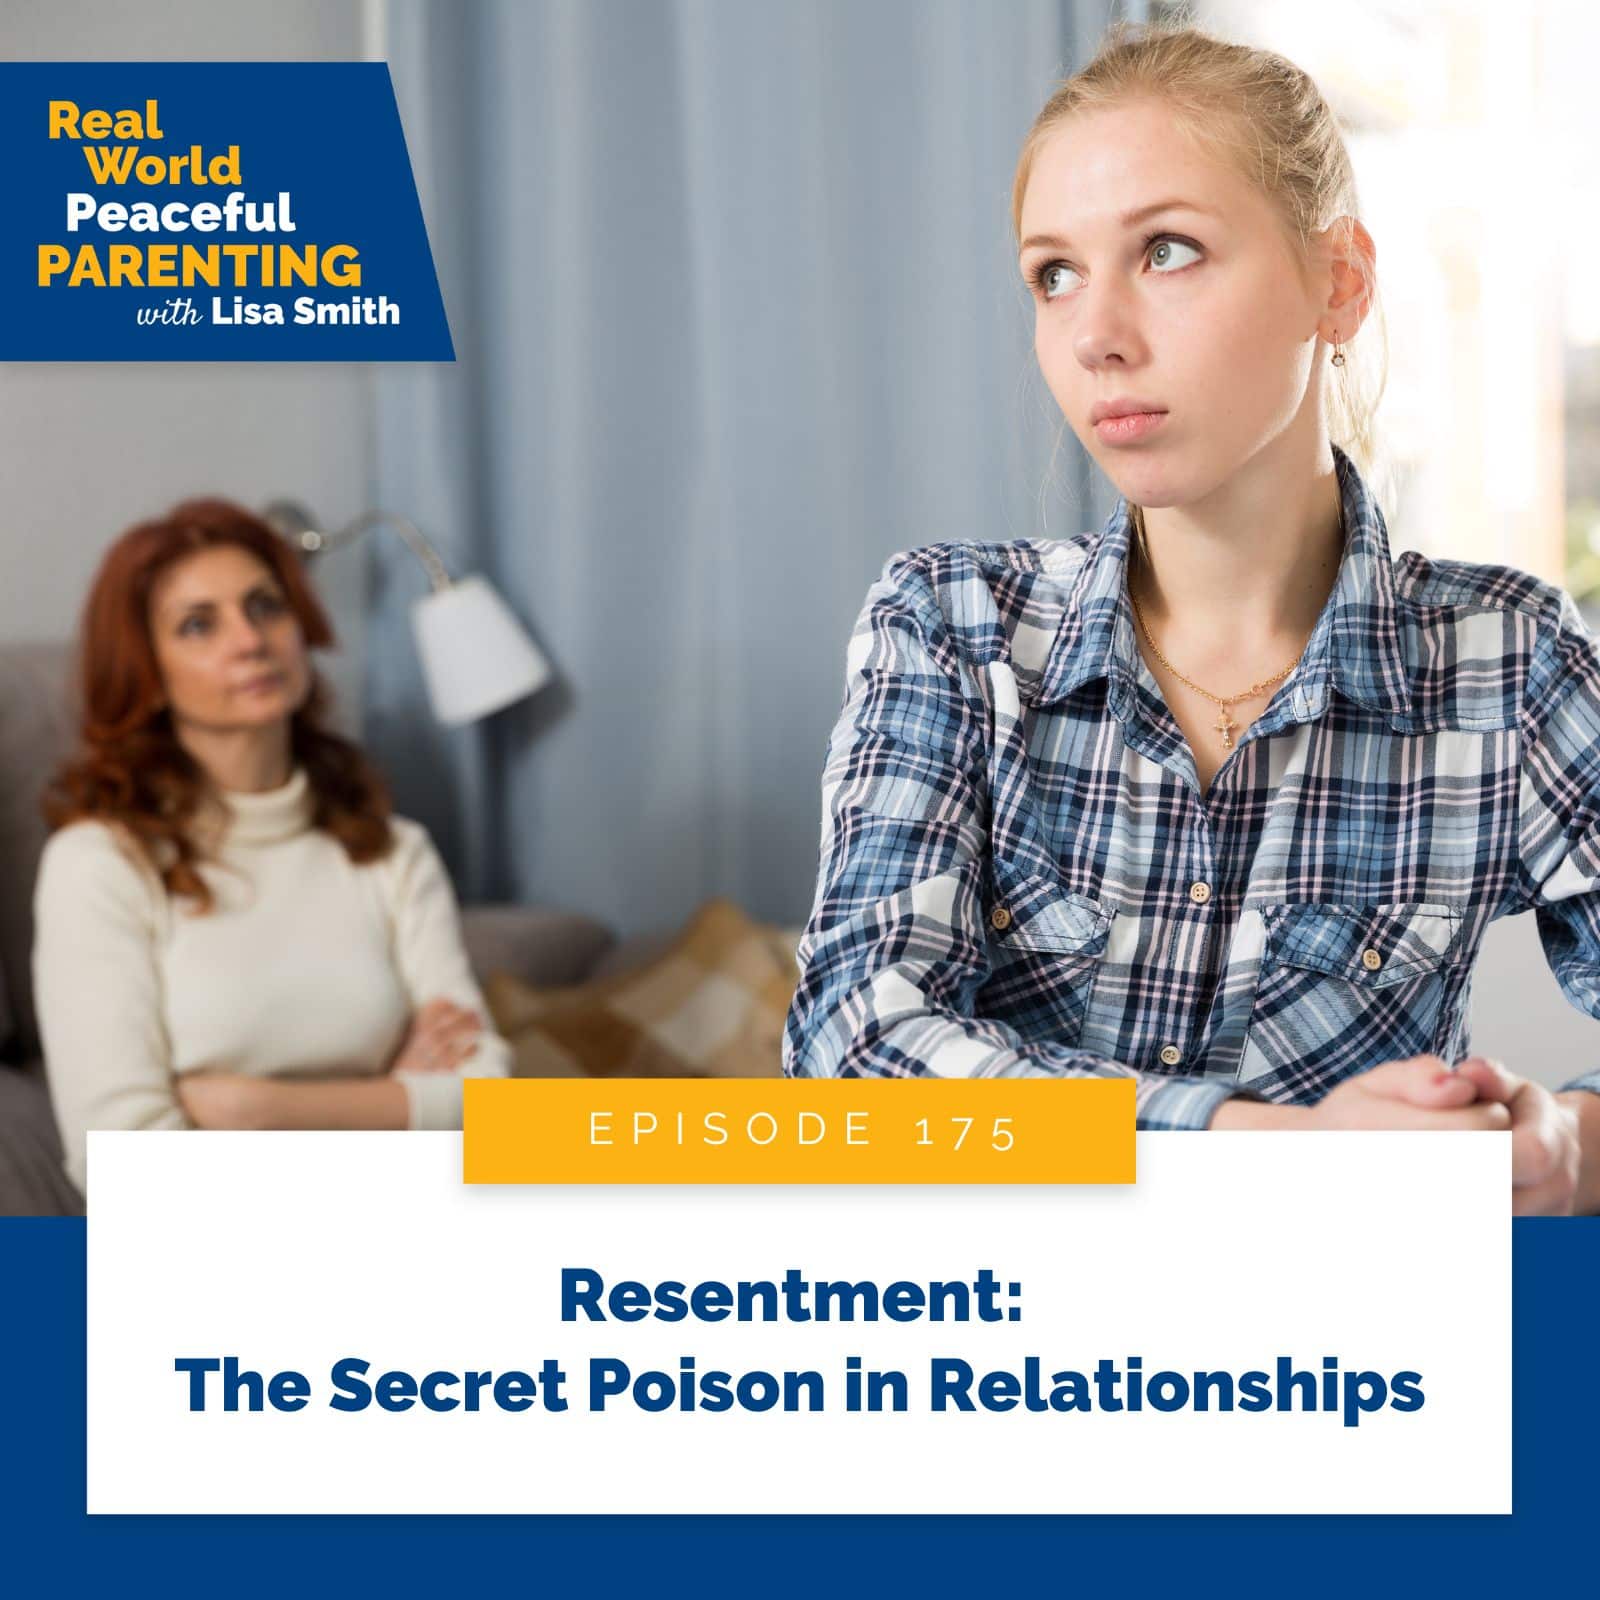 Real World Peaceful Parenting with Lisa Smith | Resentment: The Secret Poison in Relationships